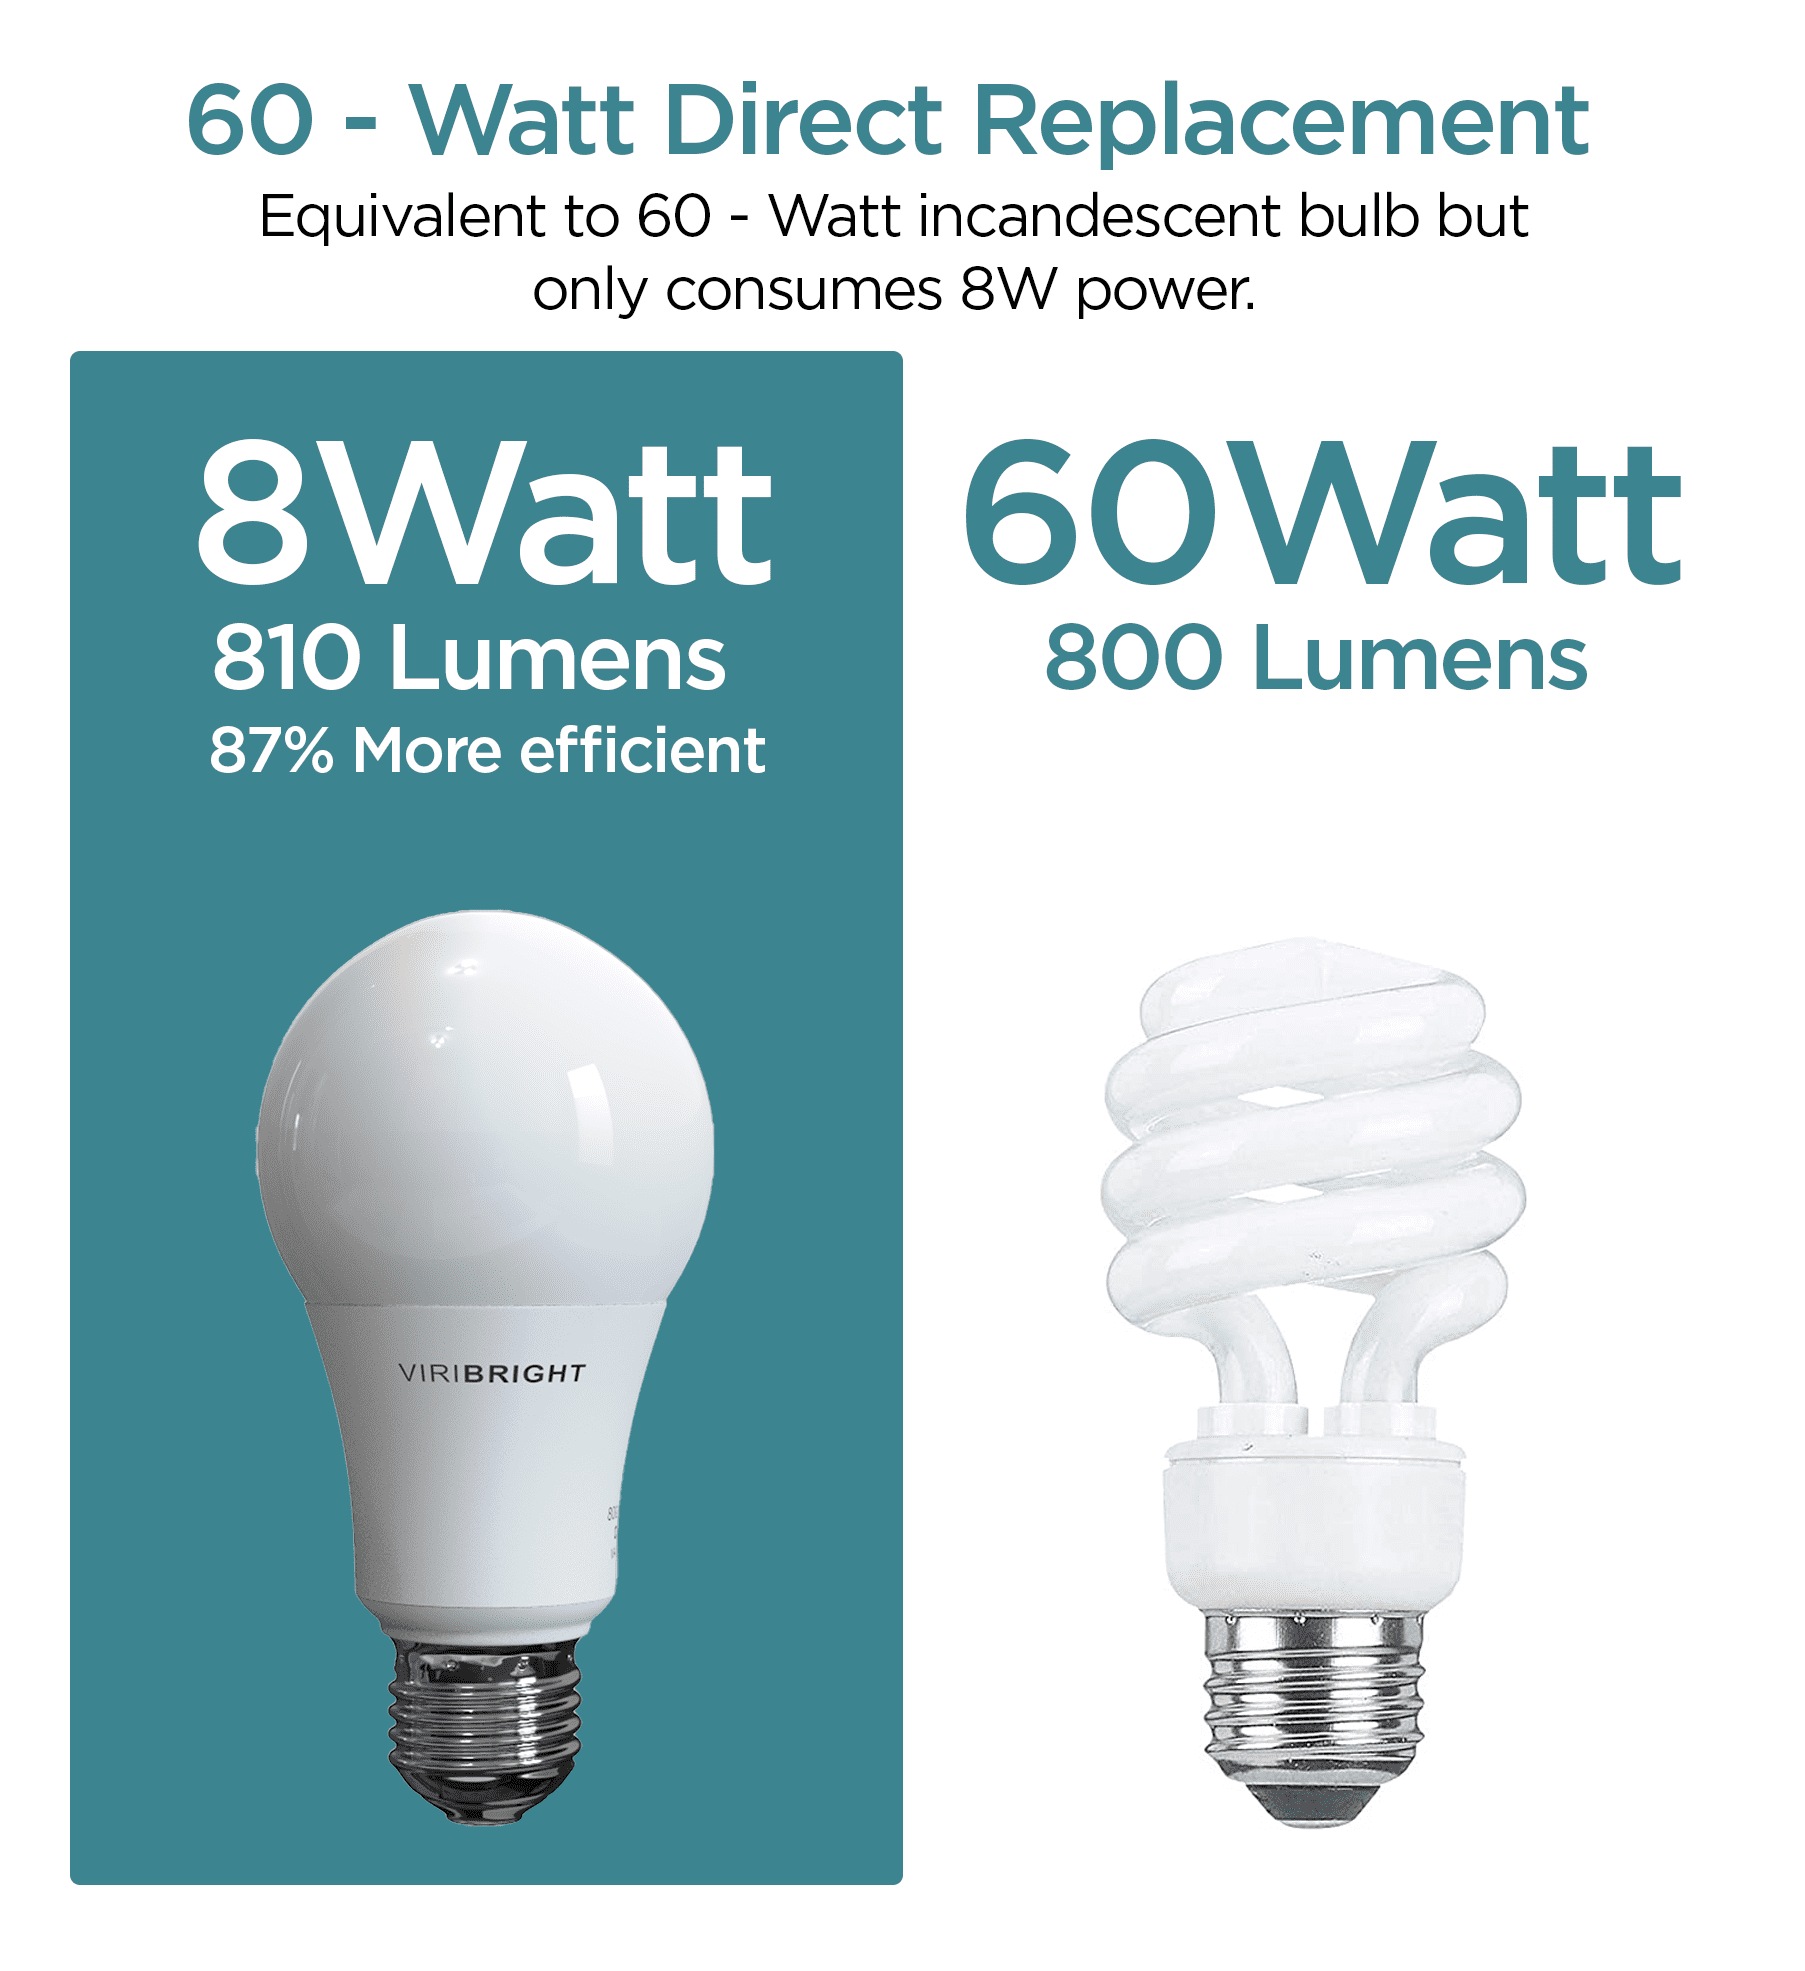 10 806 Lumens E26 Standard Base 60 Watt Incandescent Bulb Equivalent UL 2700K Soft White-18 Pack-Suitable for Damp Locations White 18 Pack SELS A19-10W-E26-2700K-18PACK A19 Led 18 Piece